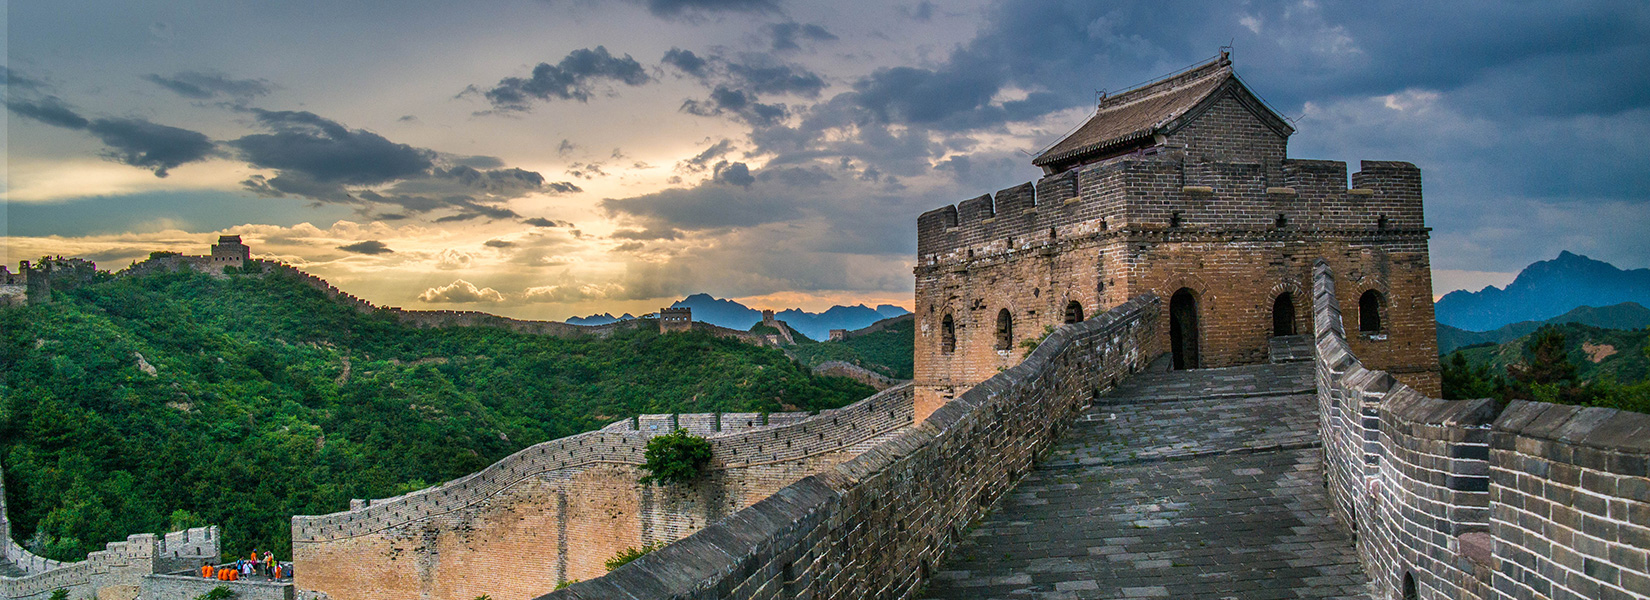 The Best Places to Visit and Things to Do in China